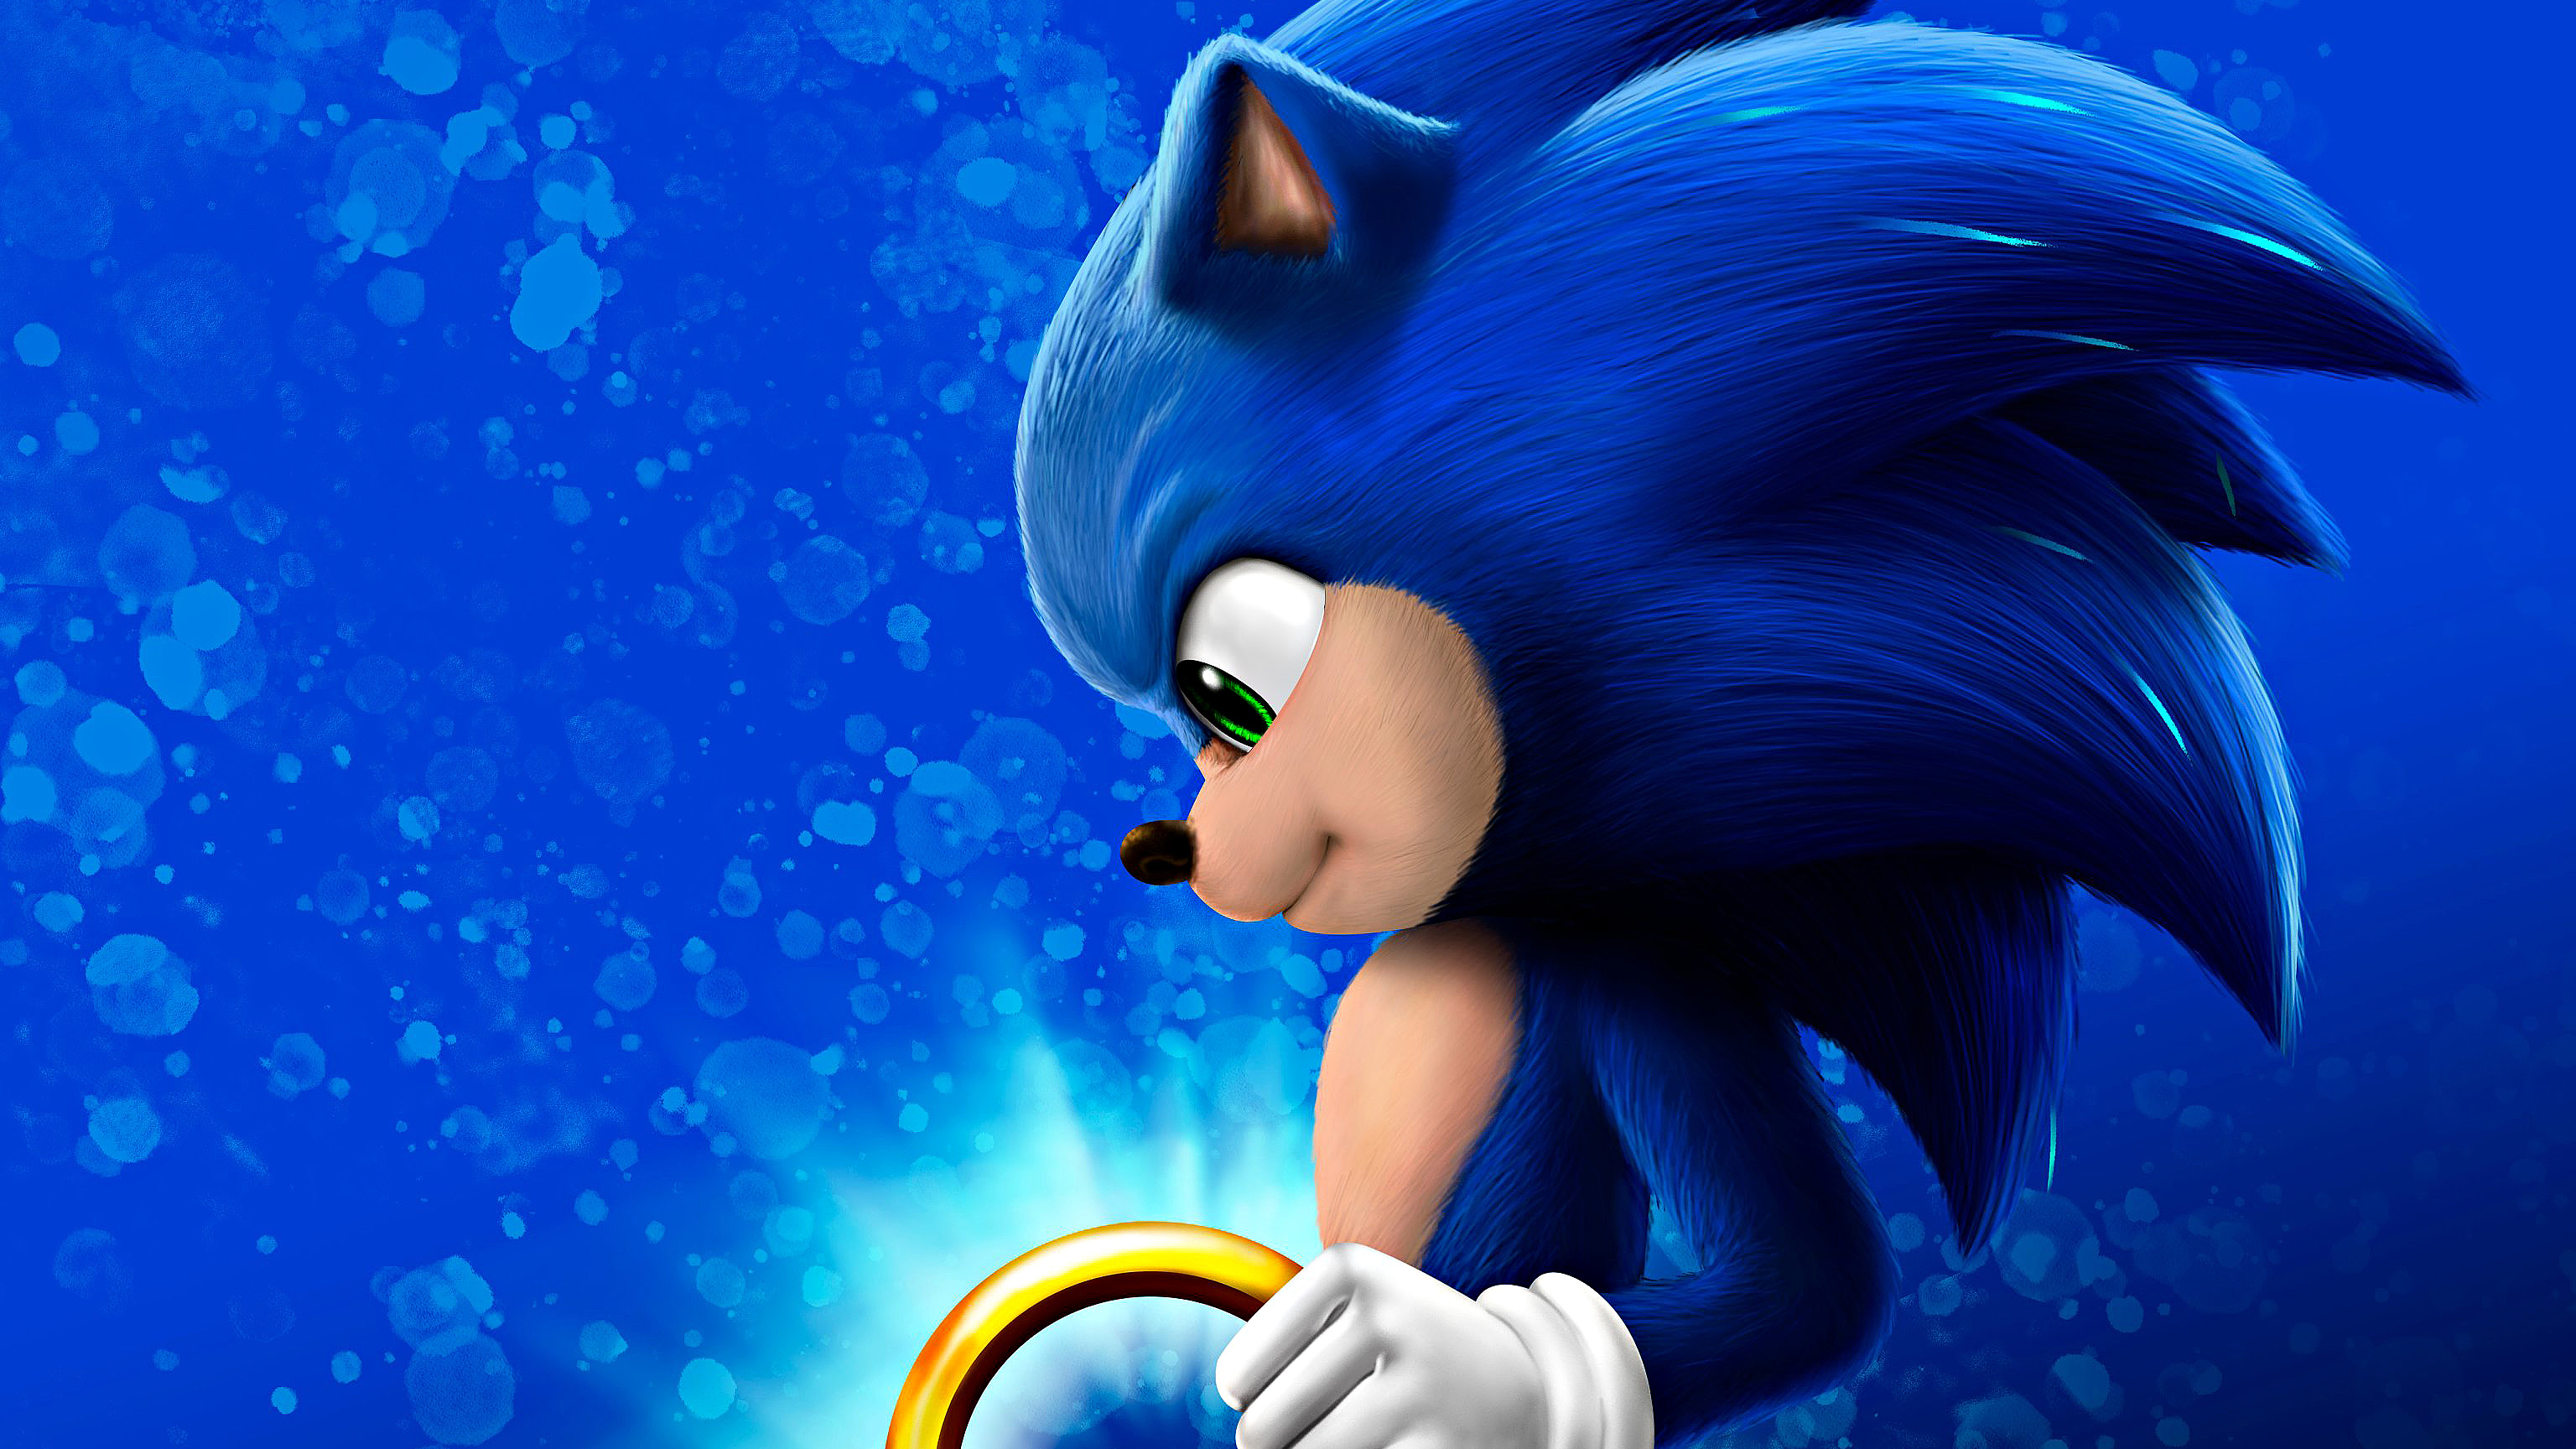 Sonic Wallpaper For Computer